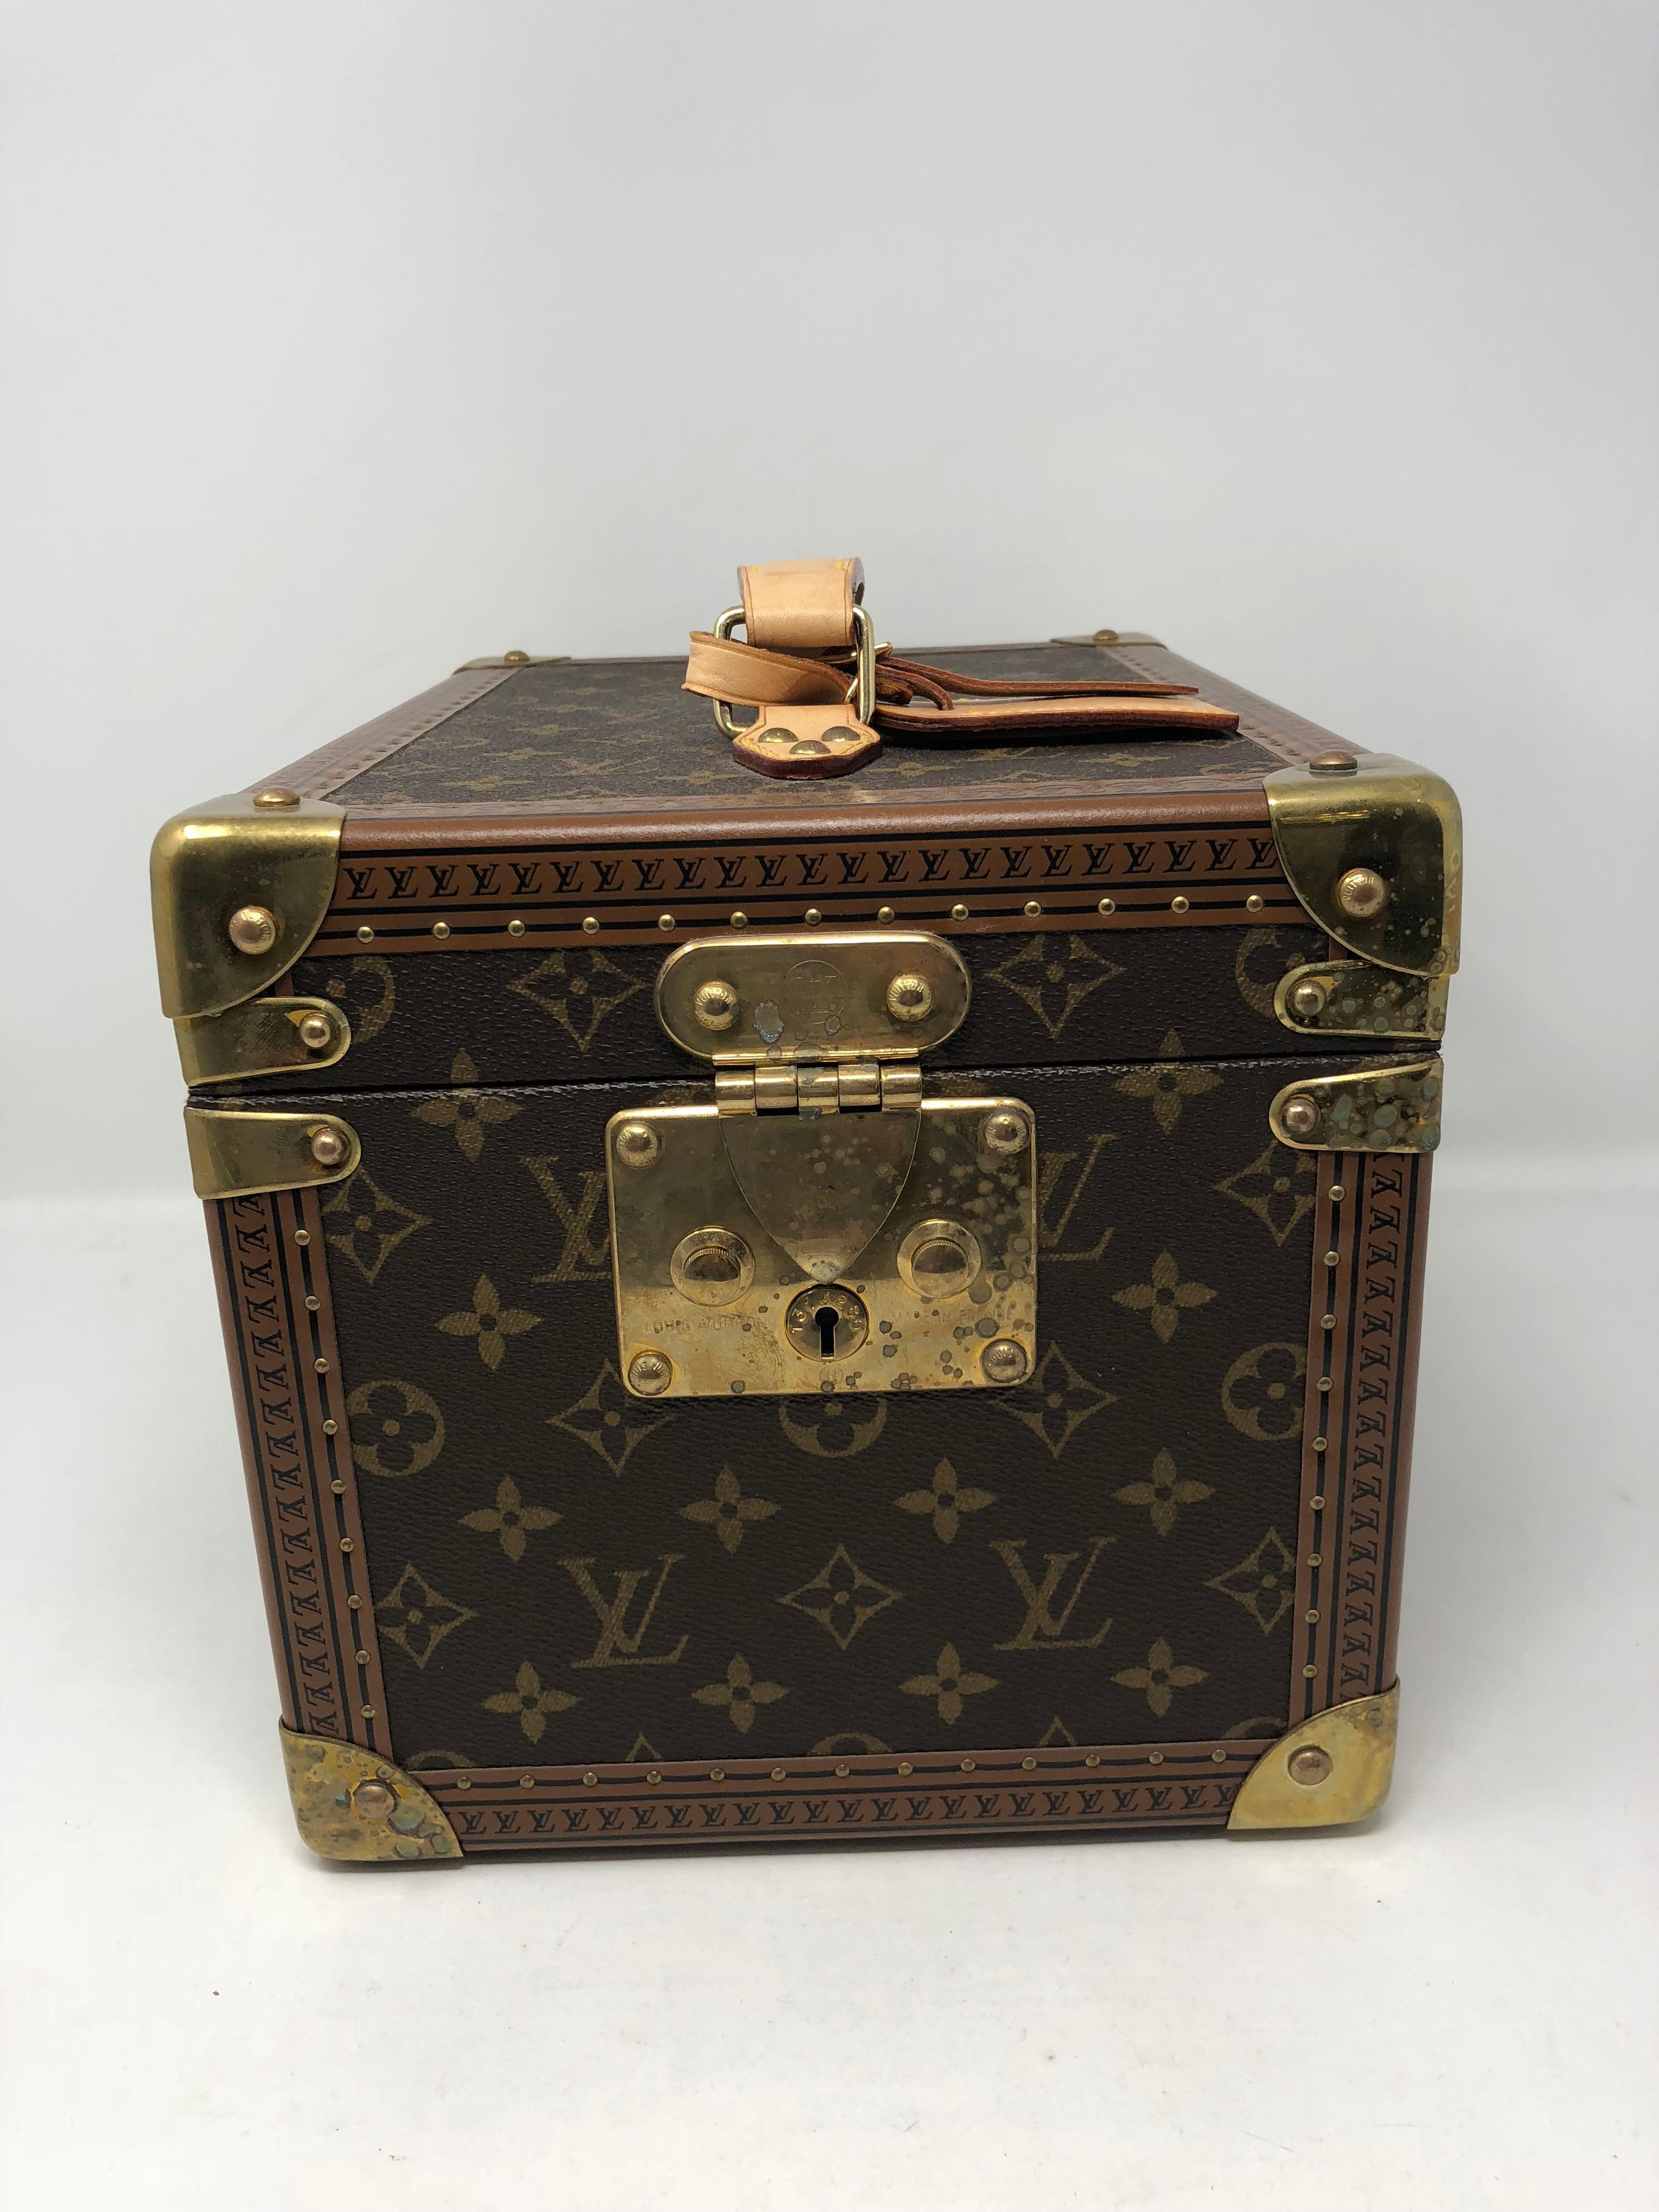 Louis Vuitton Boite Flacons Beauty Train Case in good condition. The brass plating on front just needs a cleaning. Some oxidation from window cleaner. We did not try to clean it professionally. The inside looks new and hardly worn. Only the metal on